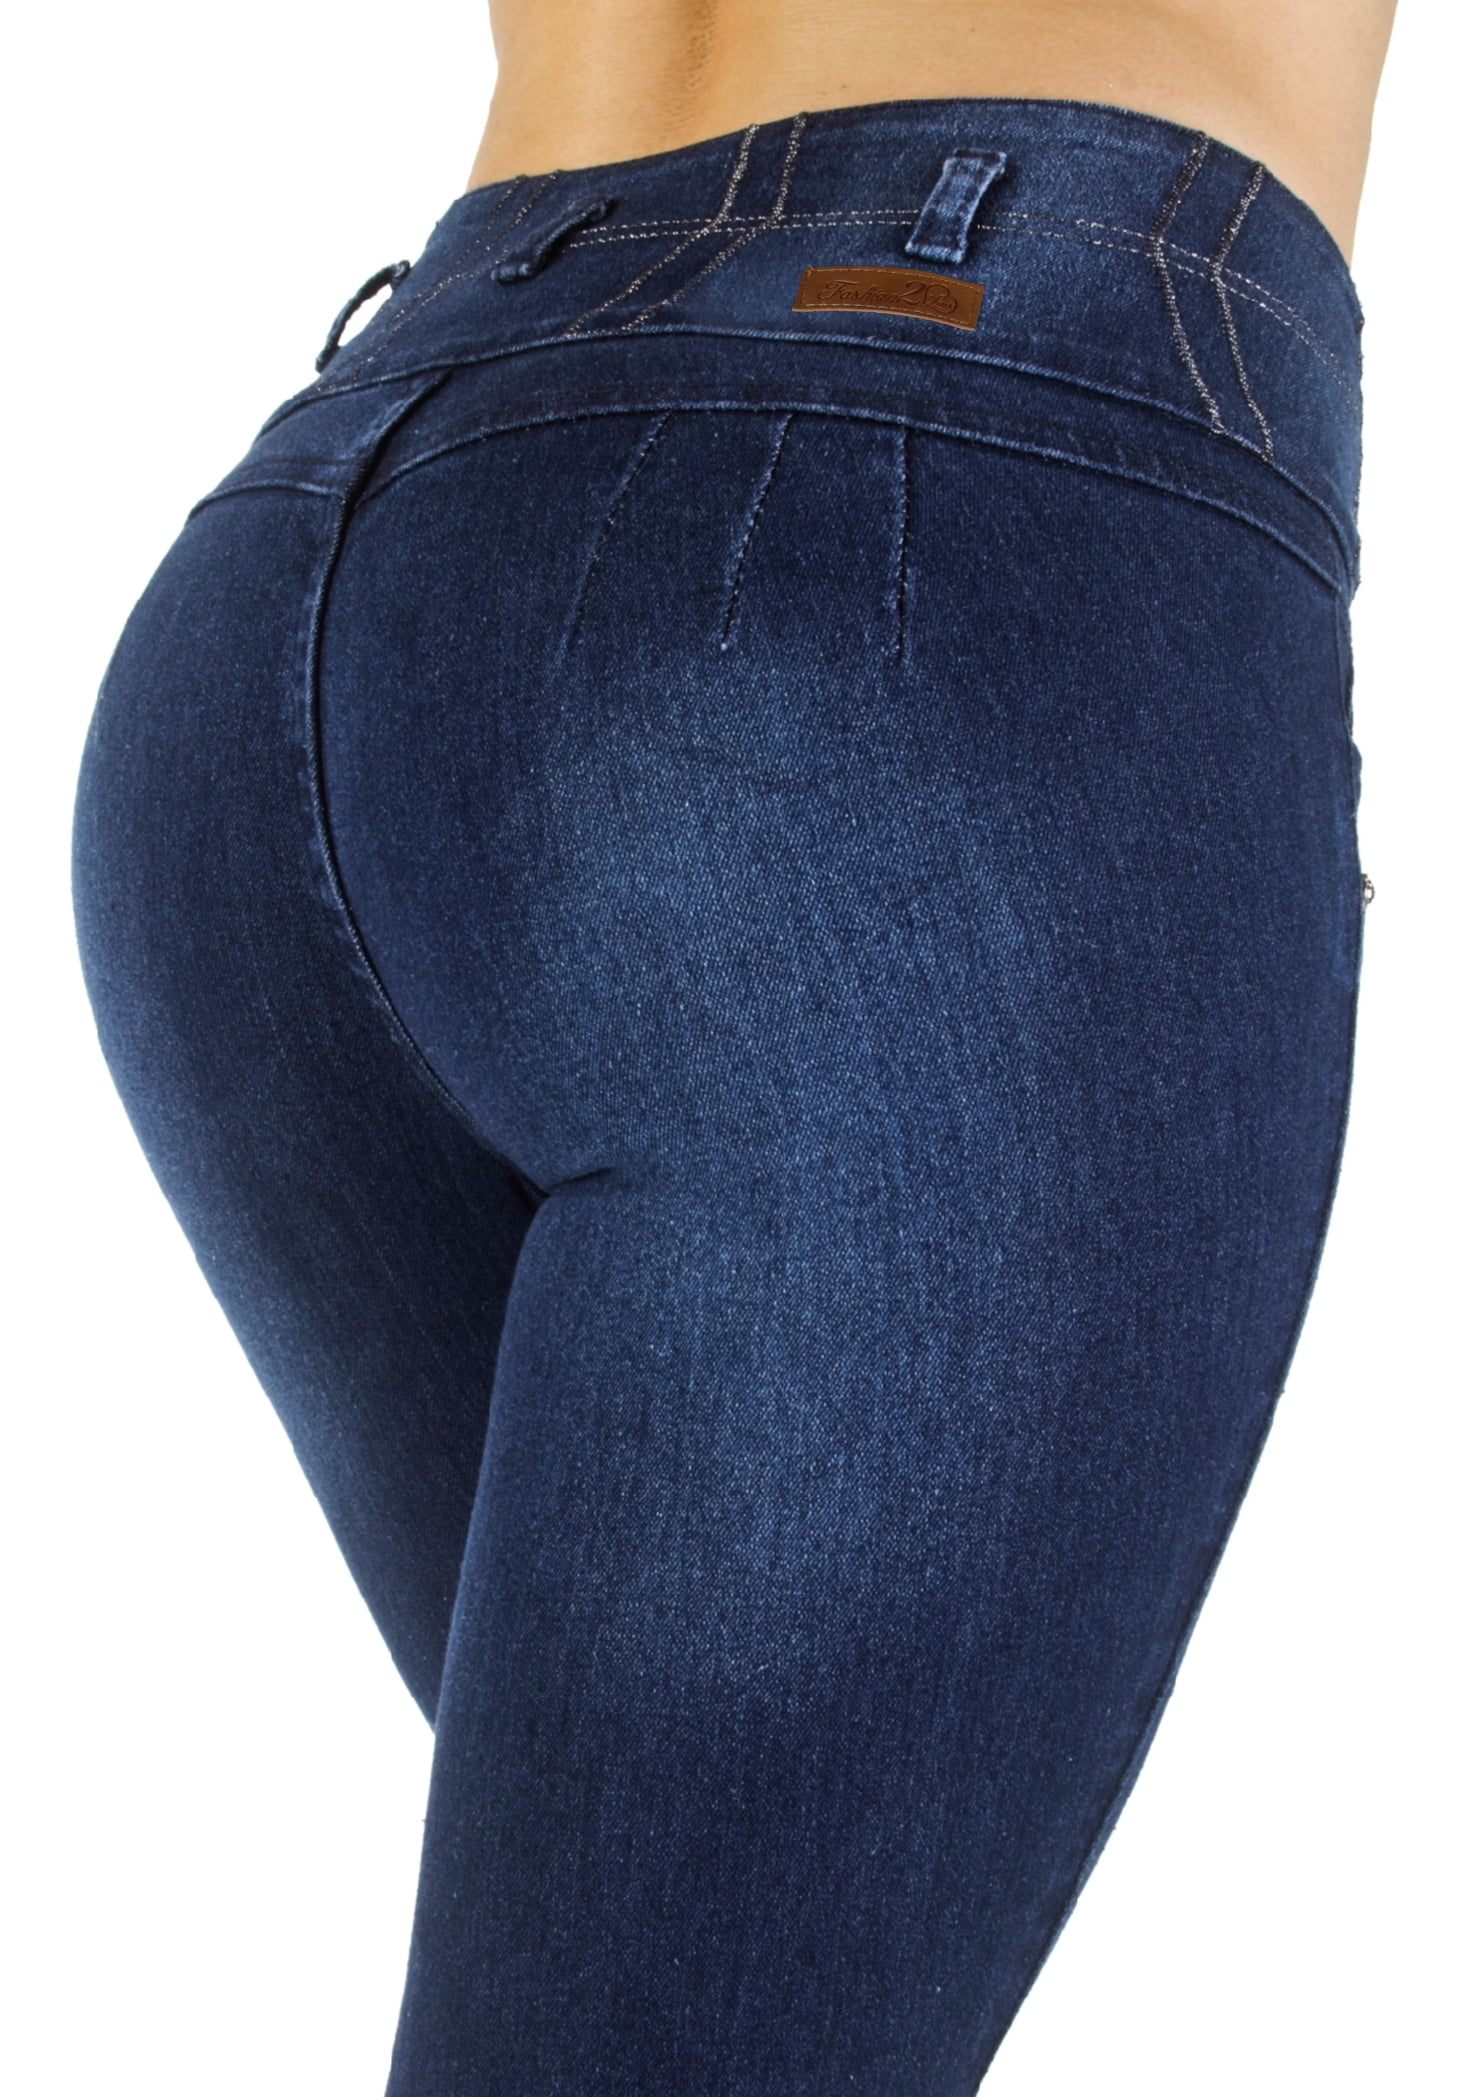 best jeans to lift bottom